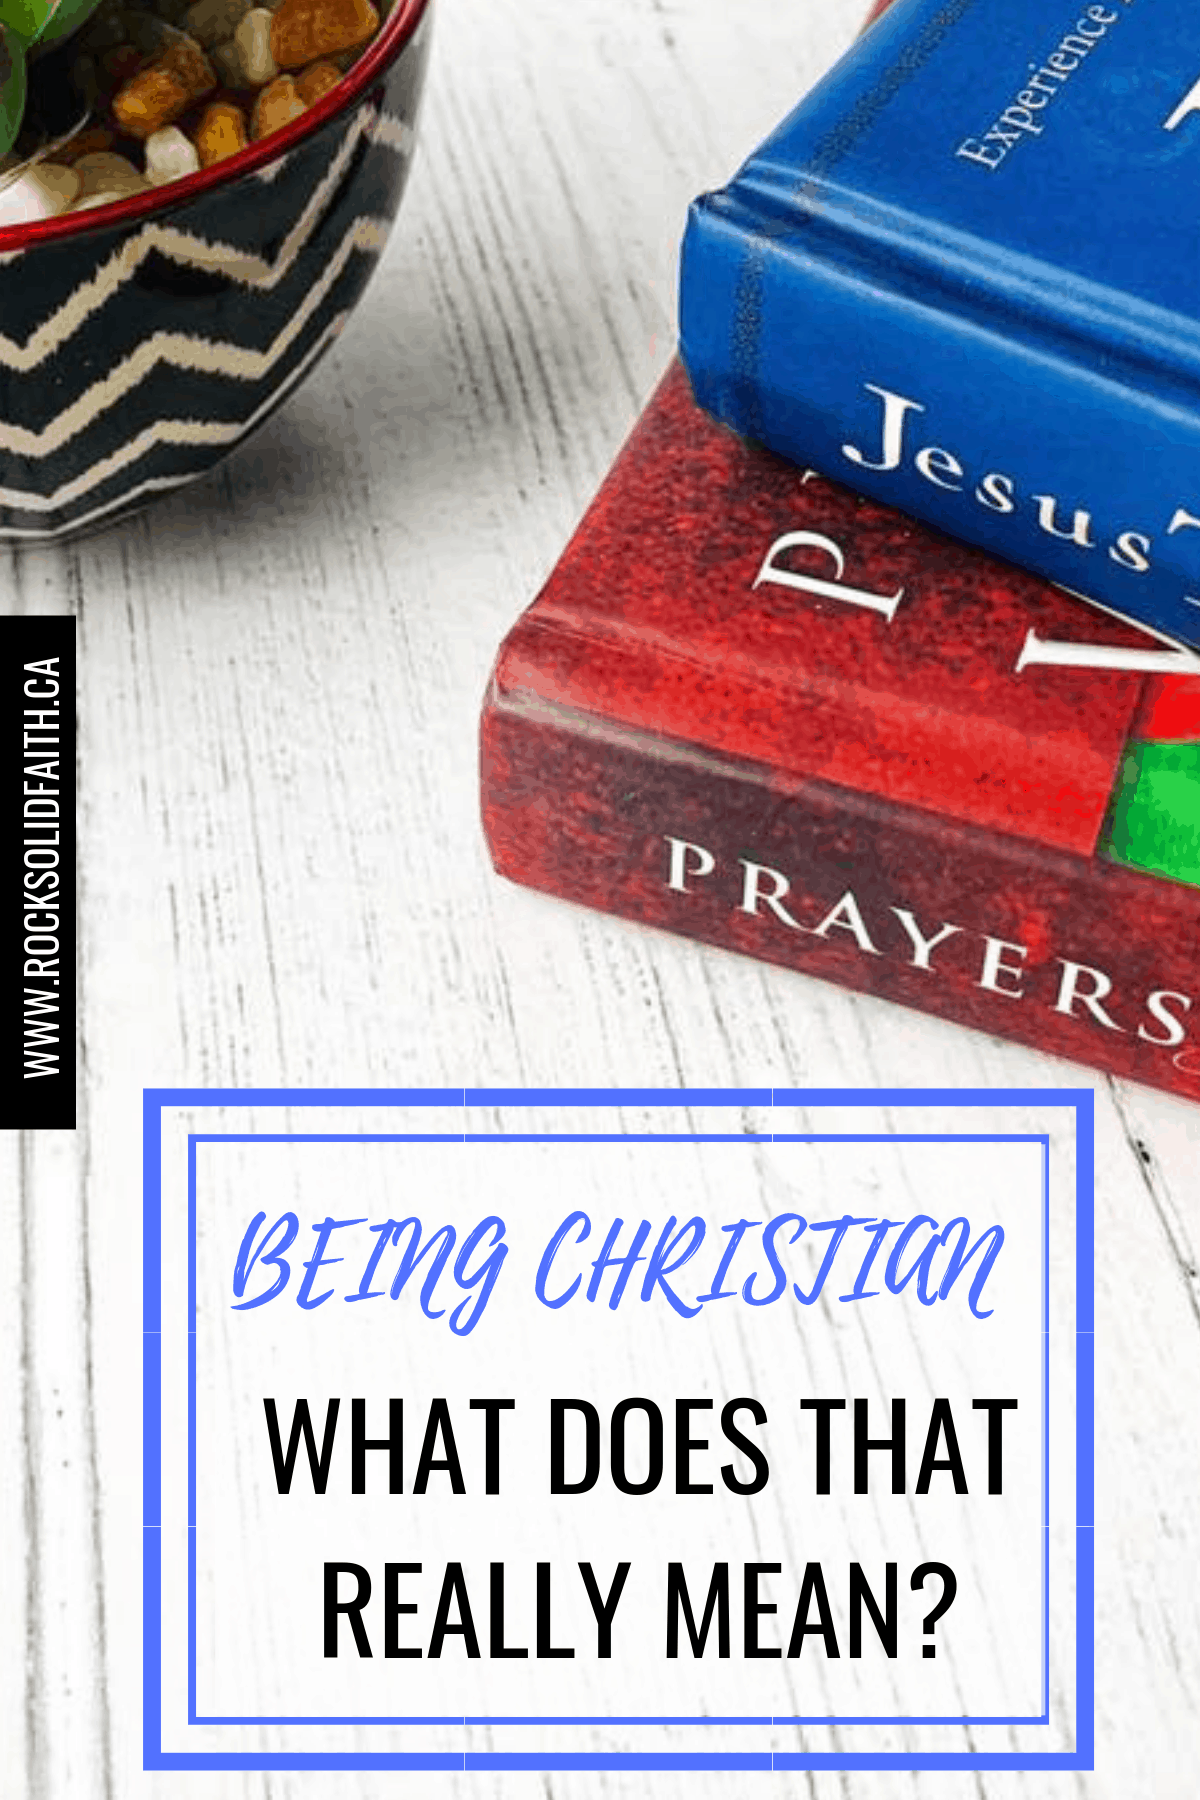 being christian: what doe sit mean to be a christian